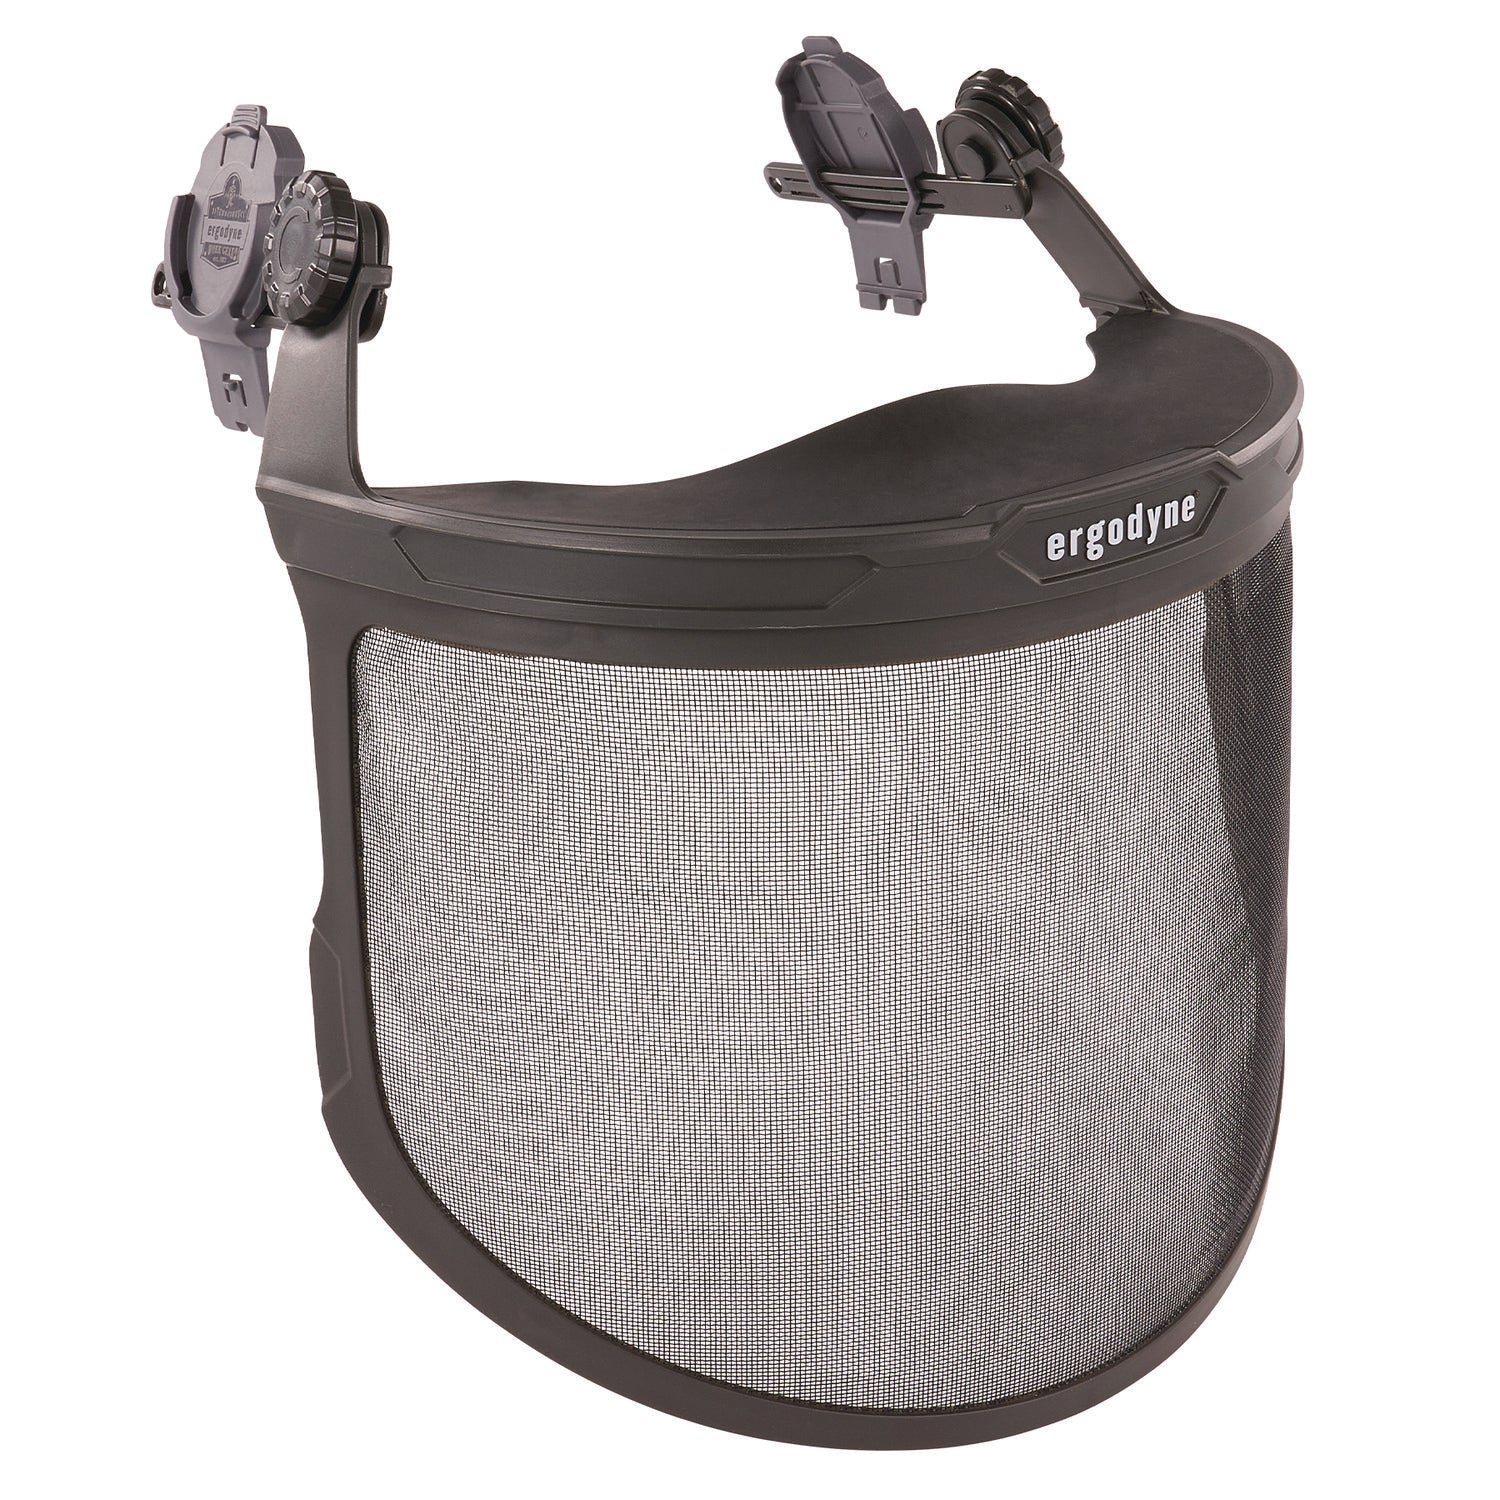 skullerz-8989-mesh-face-shield-with-adapter-for-hard-hat-and-safety-helmet-gray-ships-in-1-3-business-days_ego60247 - 1